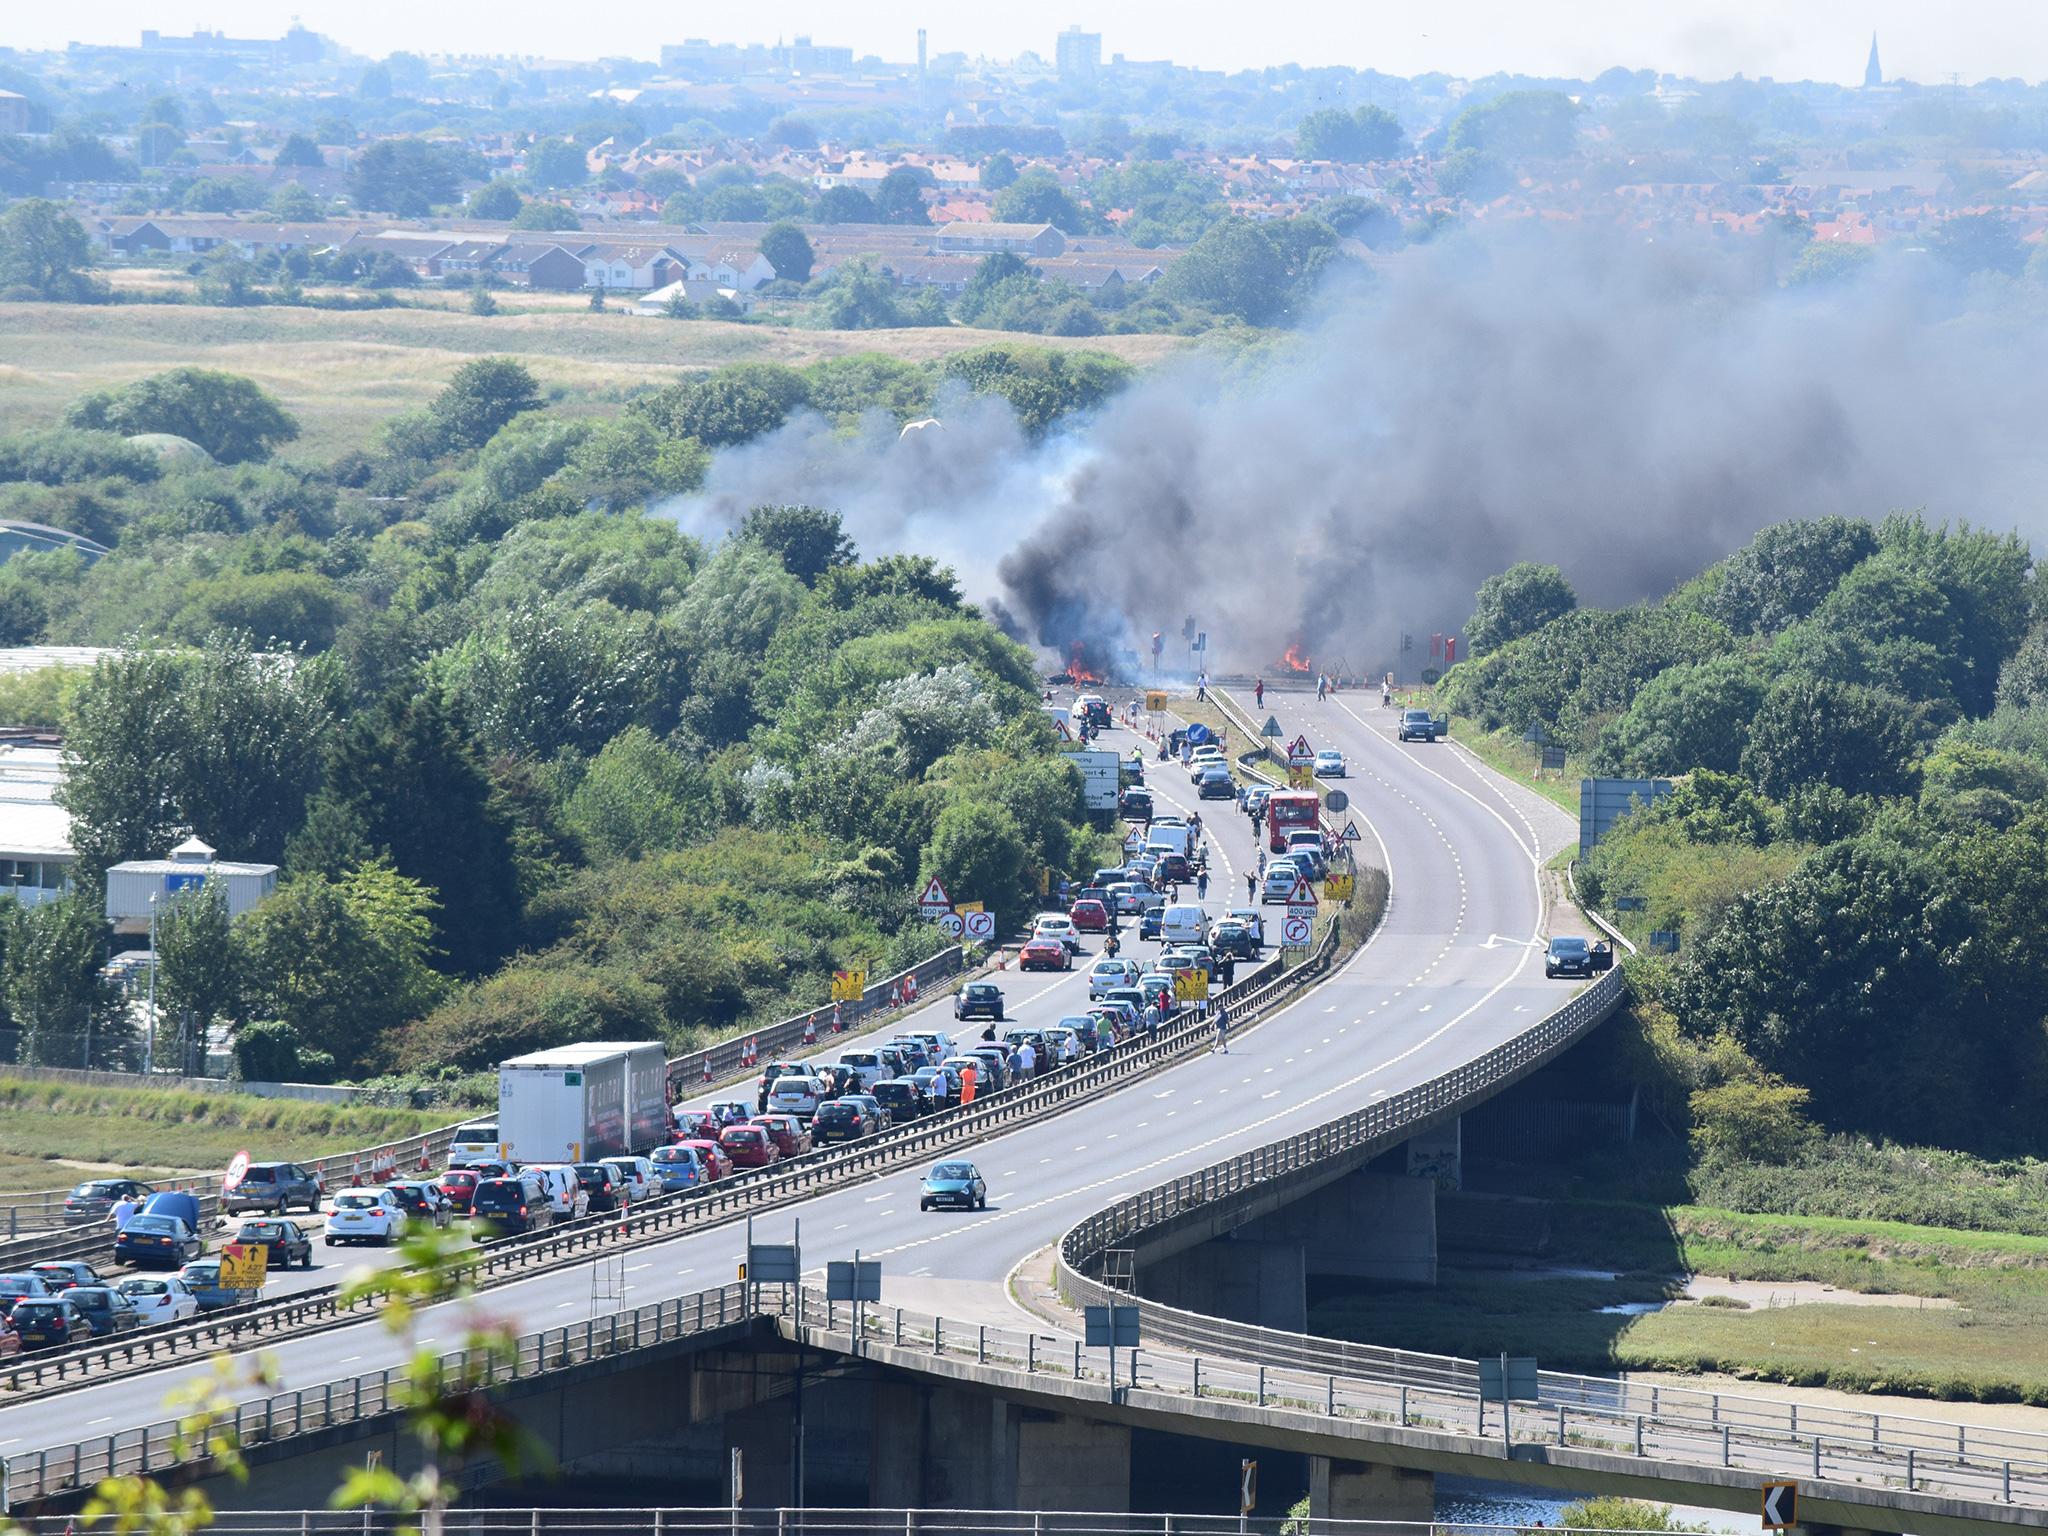 The scene at the A27 following the accident (Richard Blackmore)